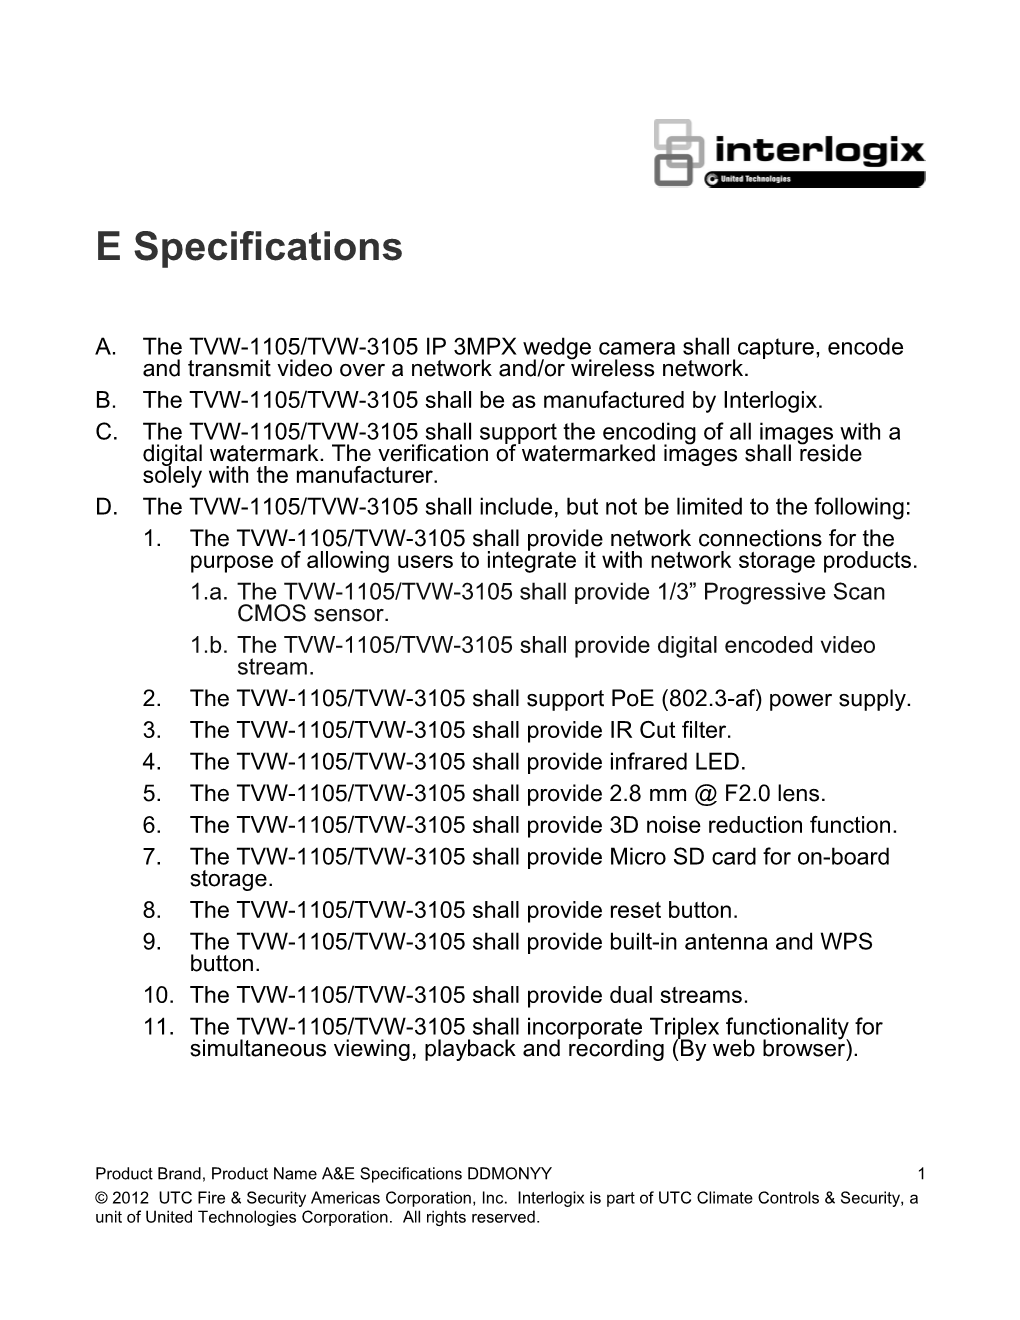 TVW-1105/TVW-3105 H.264 IP 3MPX Wedge Camera A&E Specifications